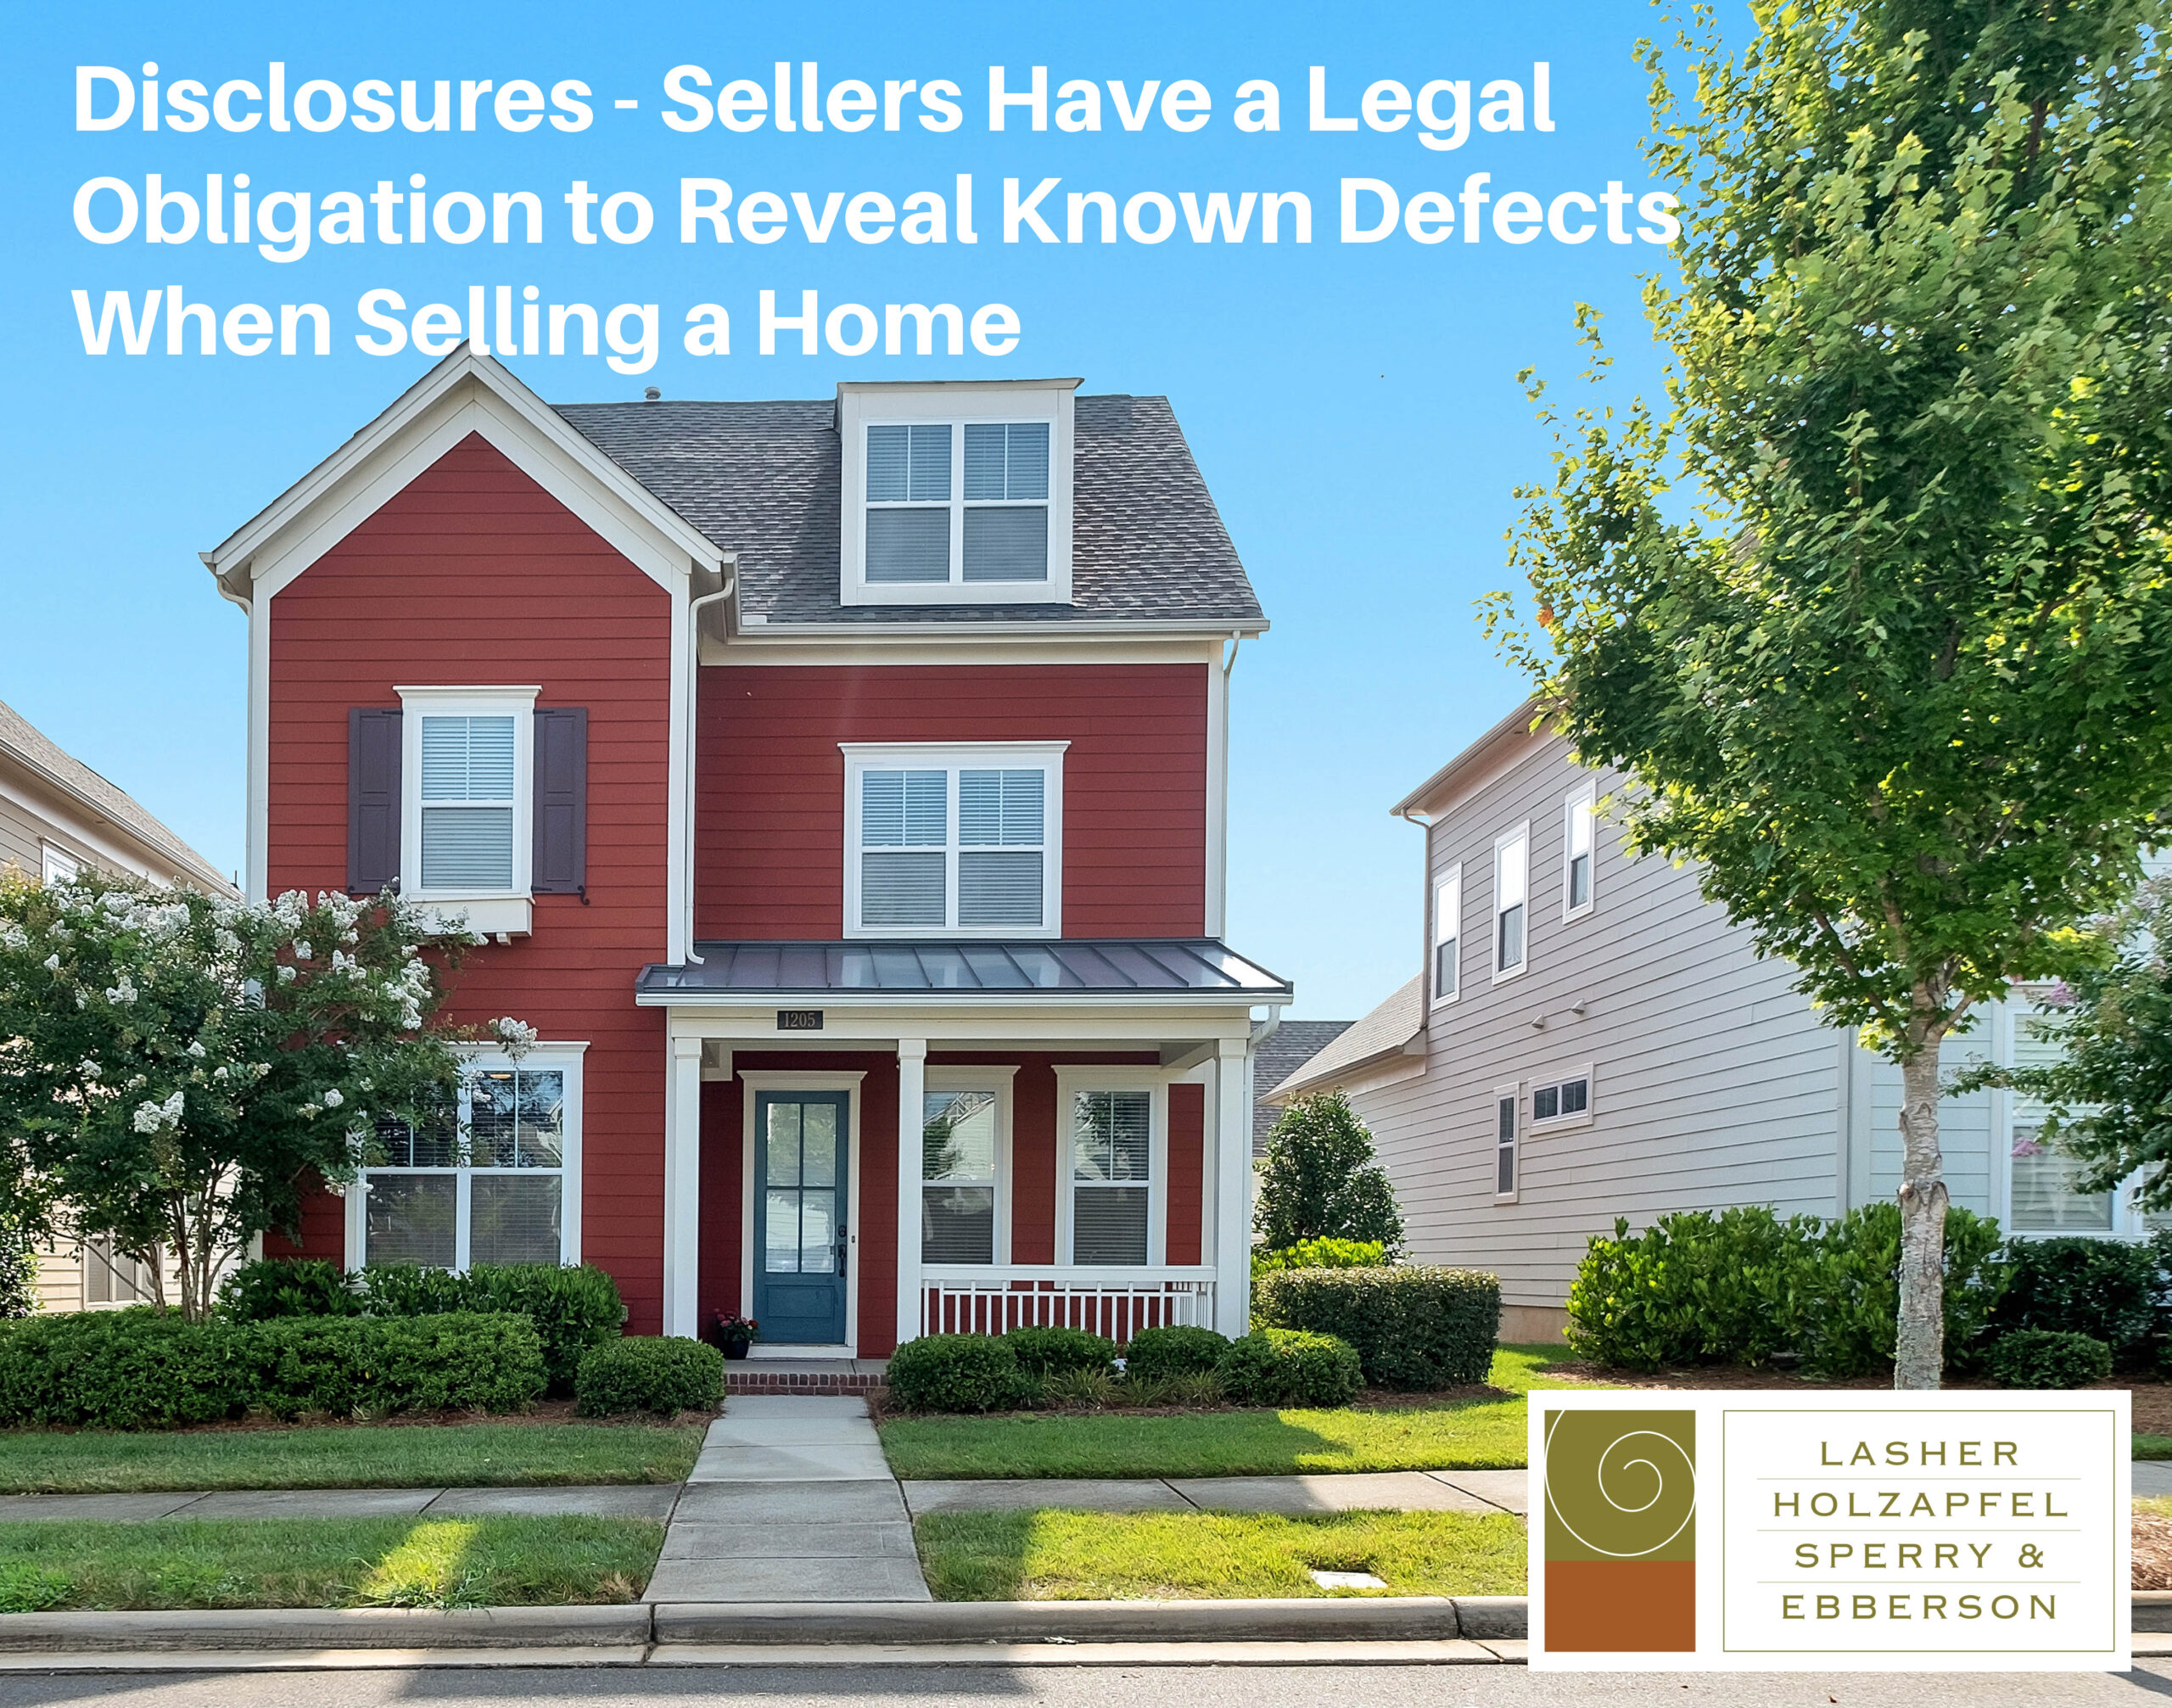 Disclosures – Sellers Have a Legal Obligation to Reveal Known Defects When Selling a Home